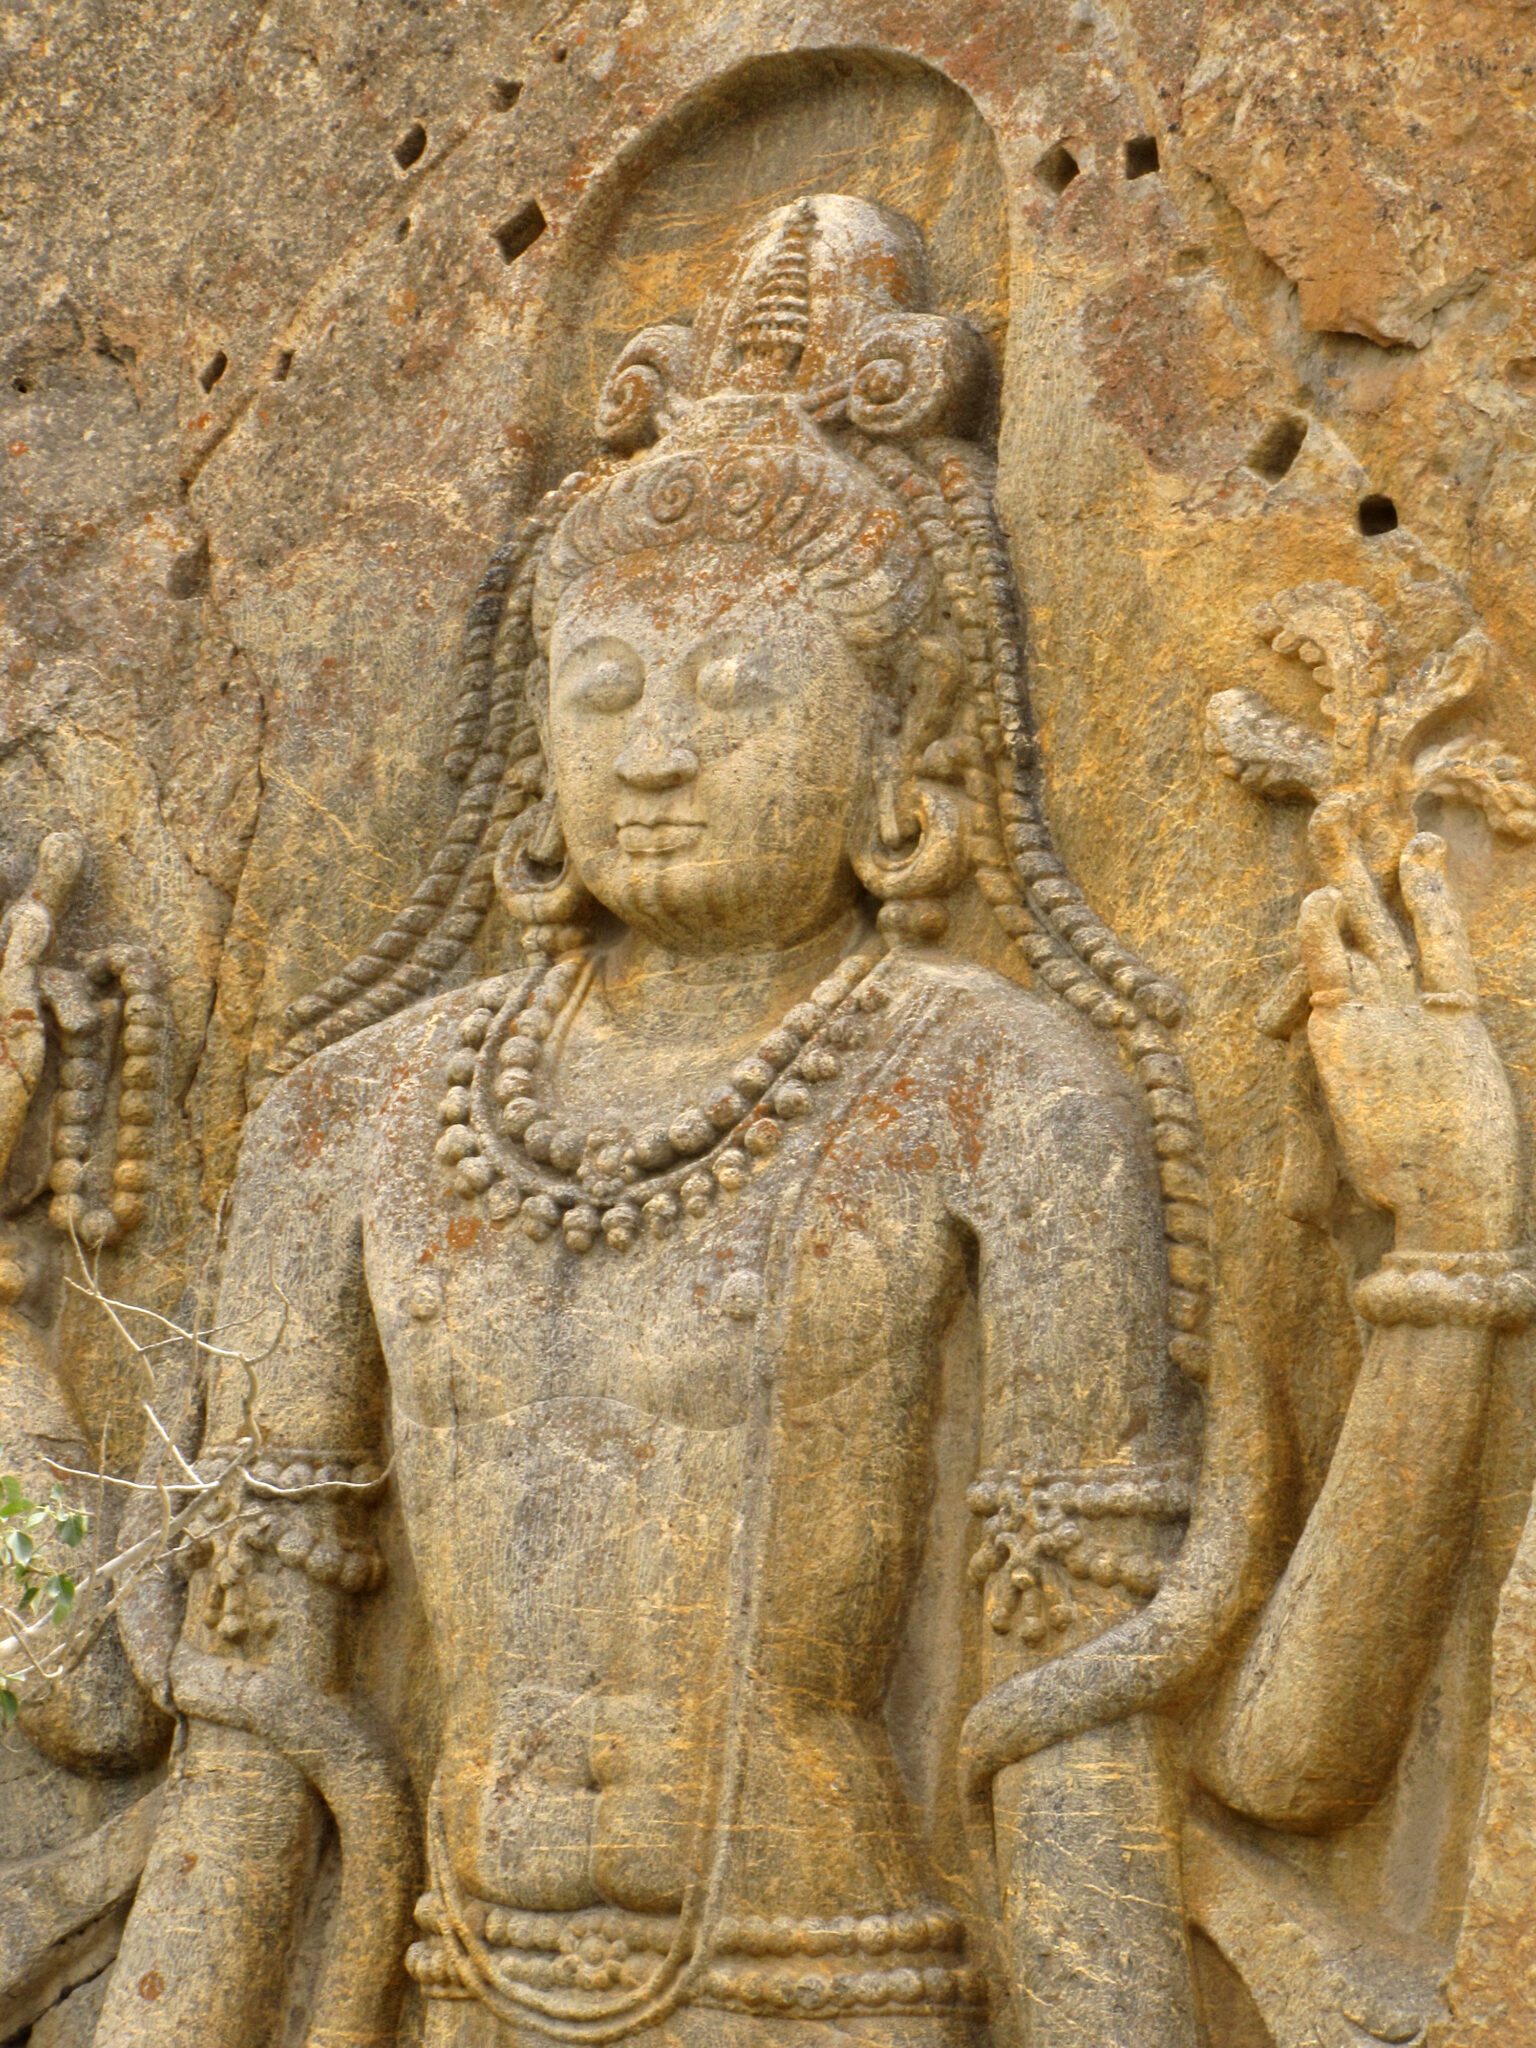 Medium view of torso and head of Bodhisattva with eyes closed; relief carved in yellow-brown stone